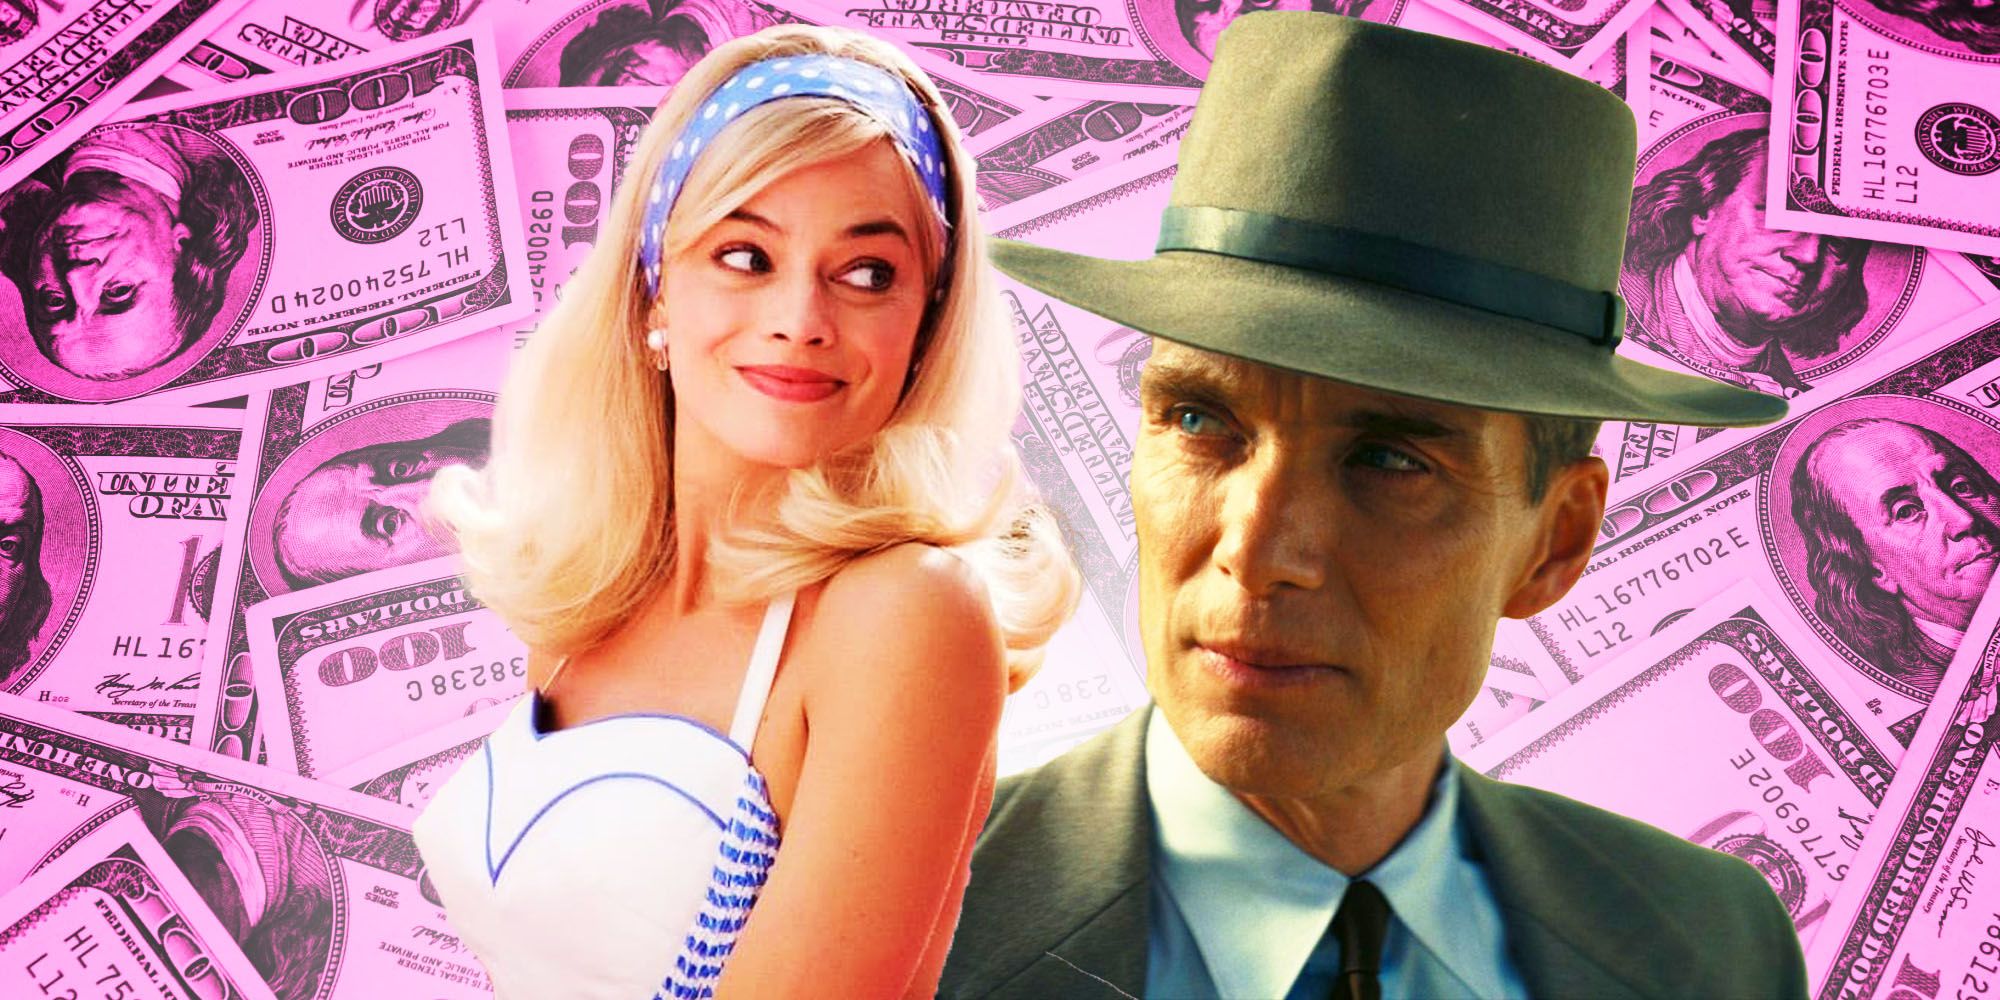 Barbenheimer collage with Margo Robbie as Barbie and Cillian Murphy as Oppenheimer superimposed over pink cash.